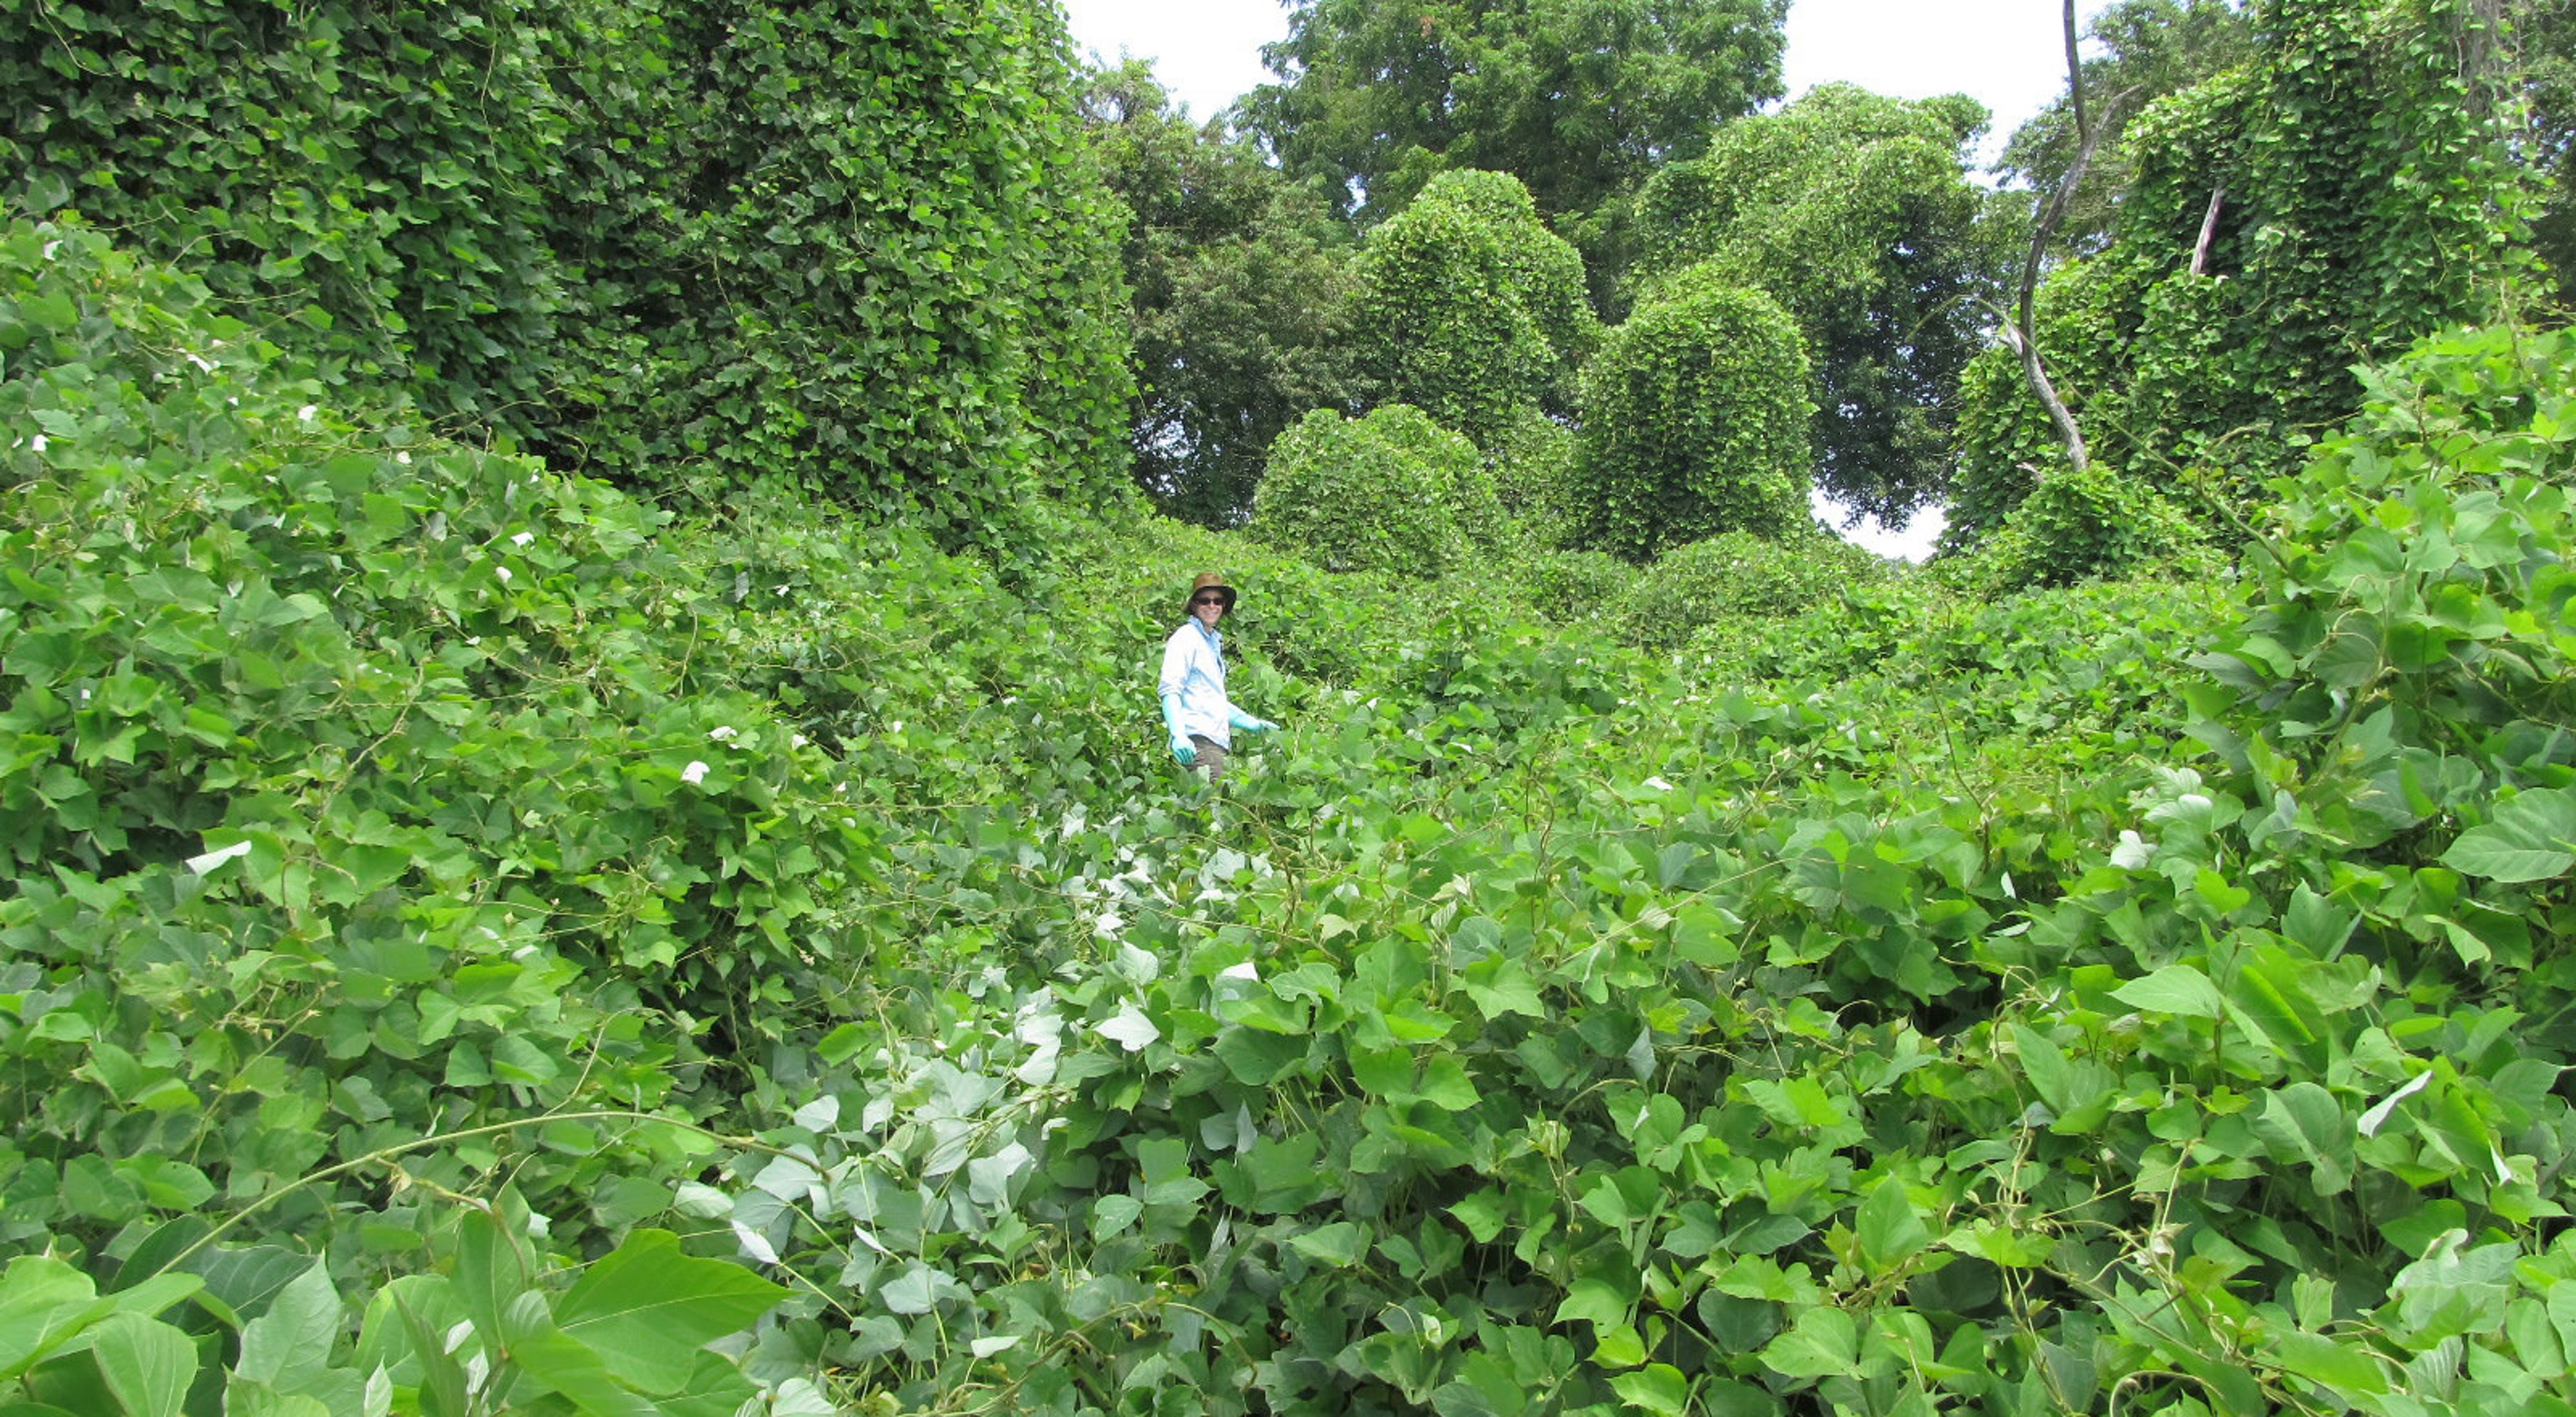 A person stands among kudzu vines that have taken over a forest